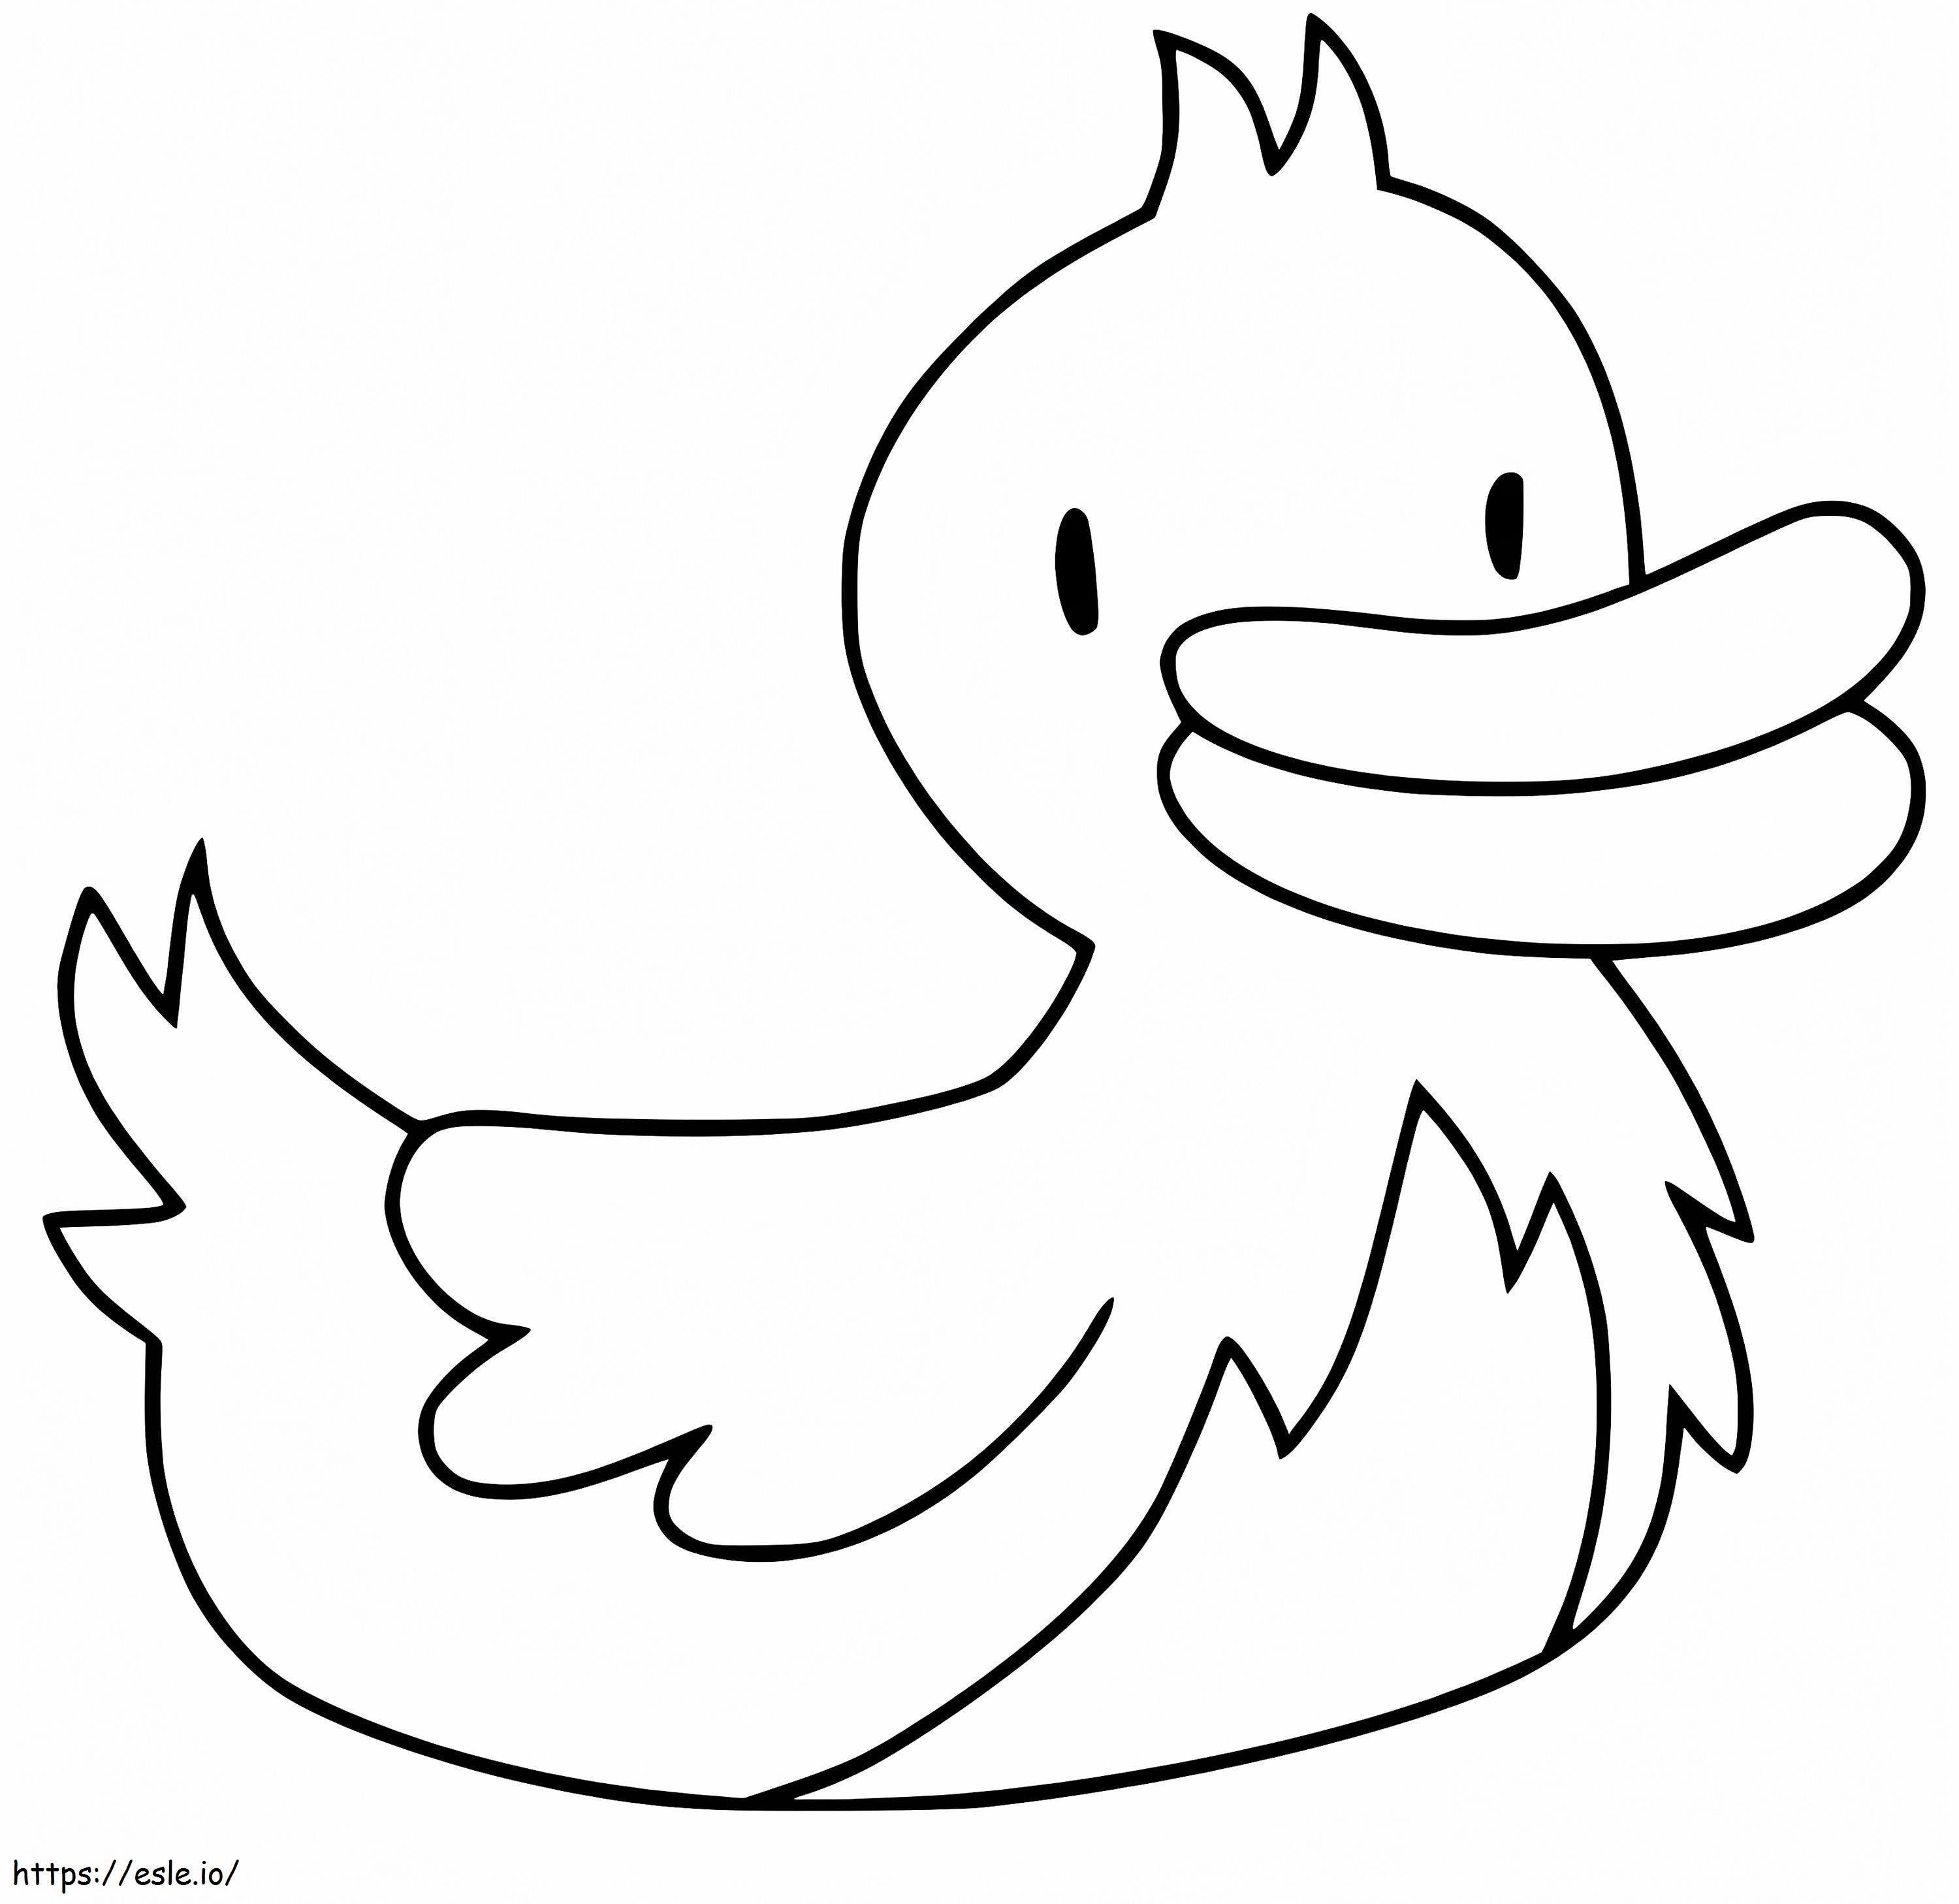 Funny Duckling coloring page